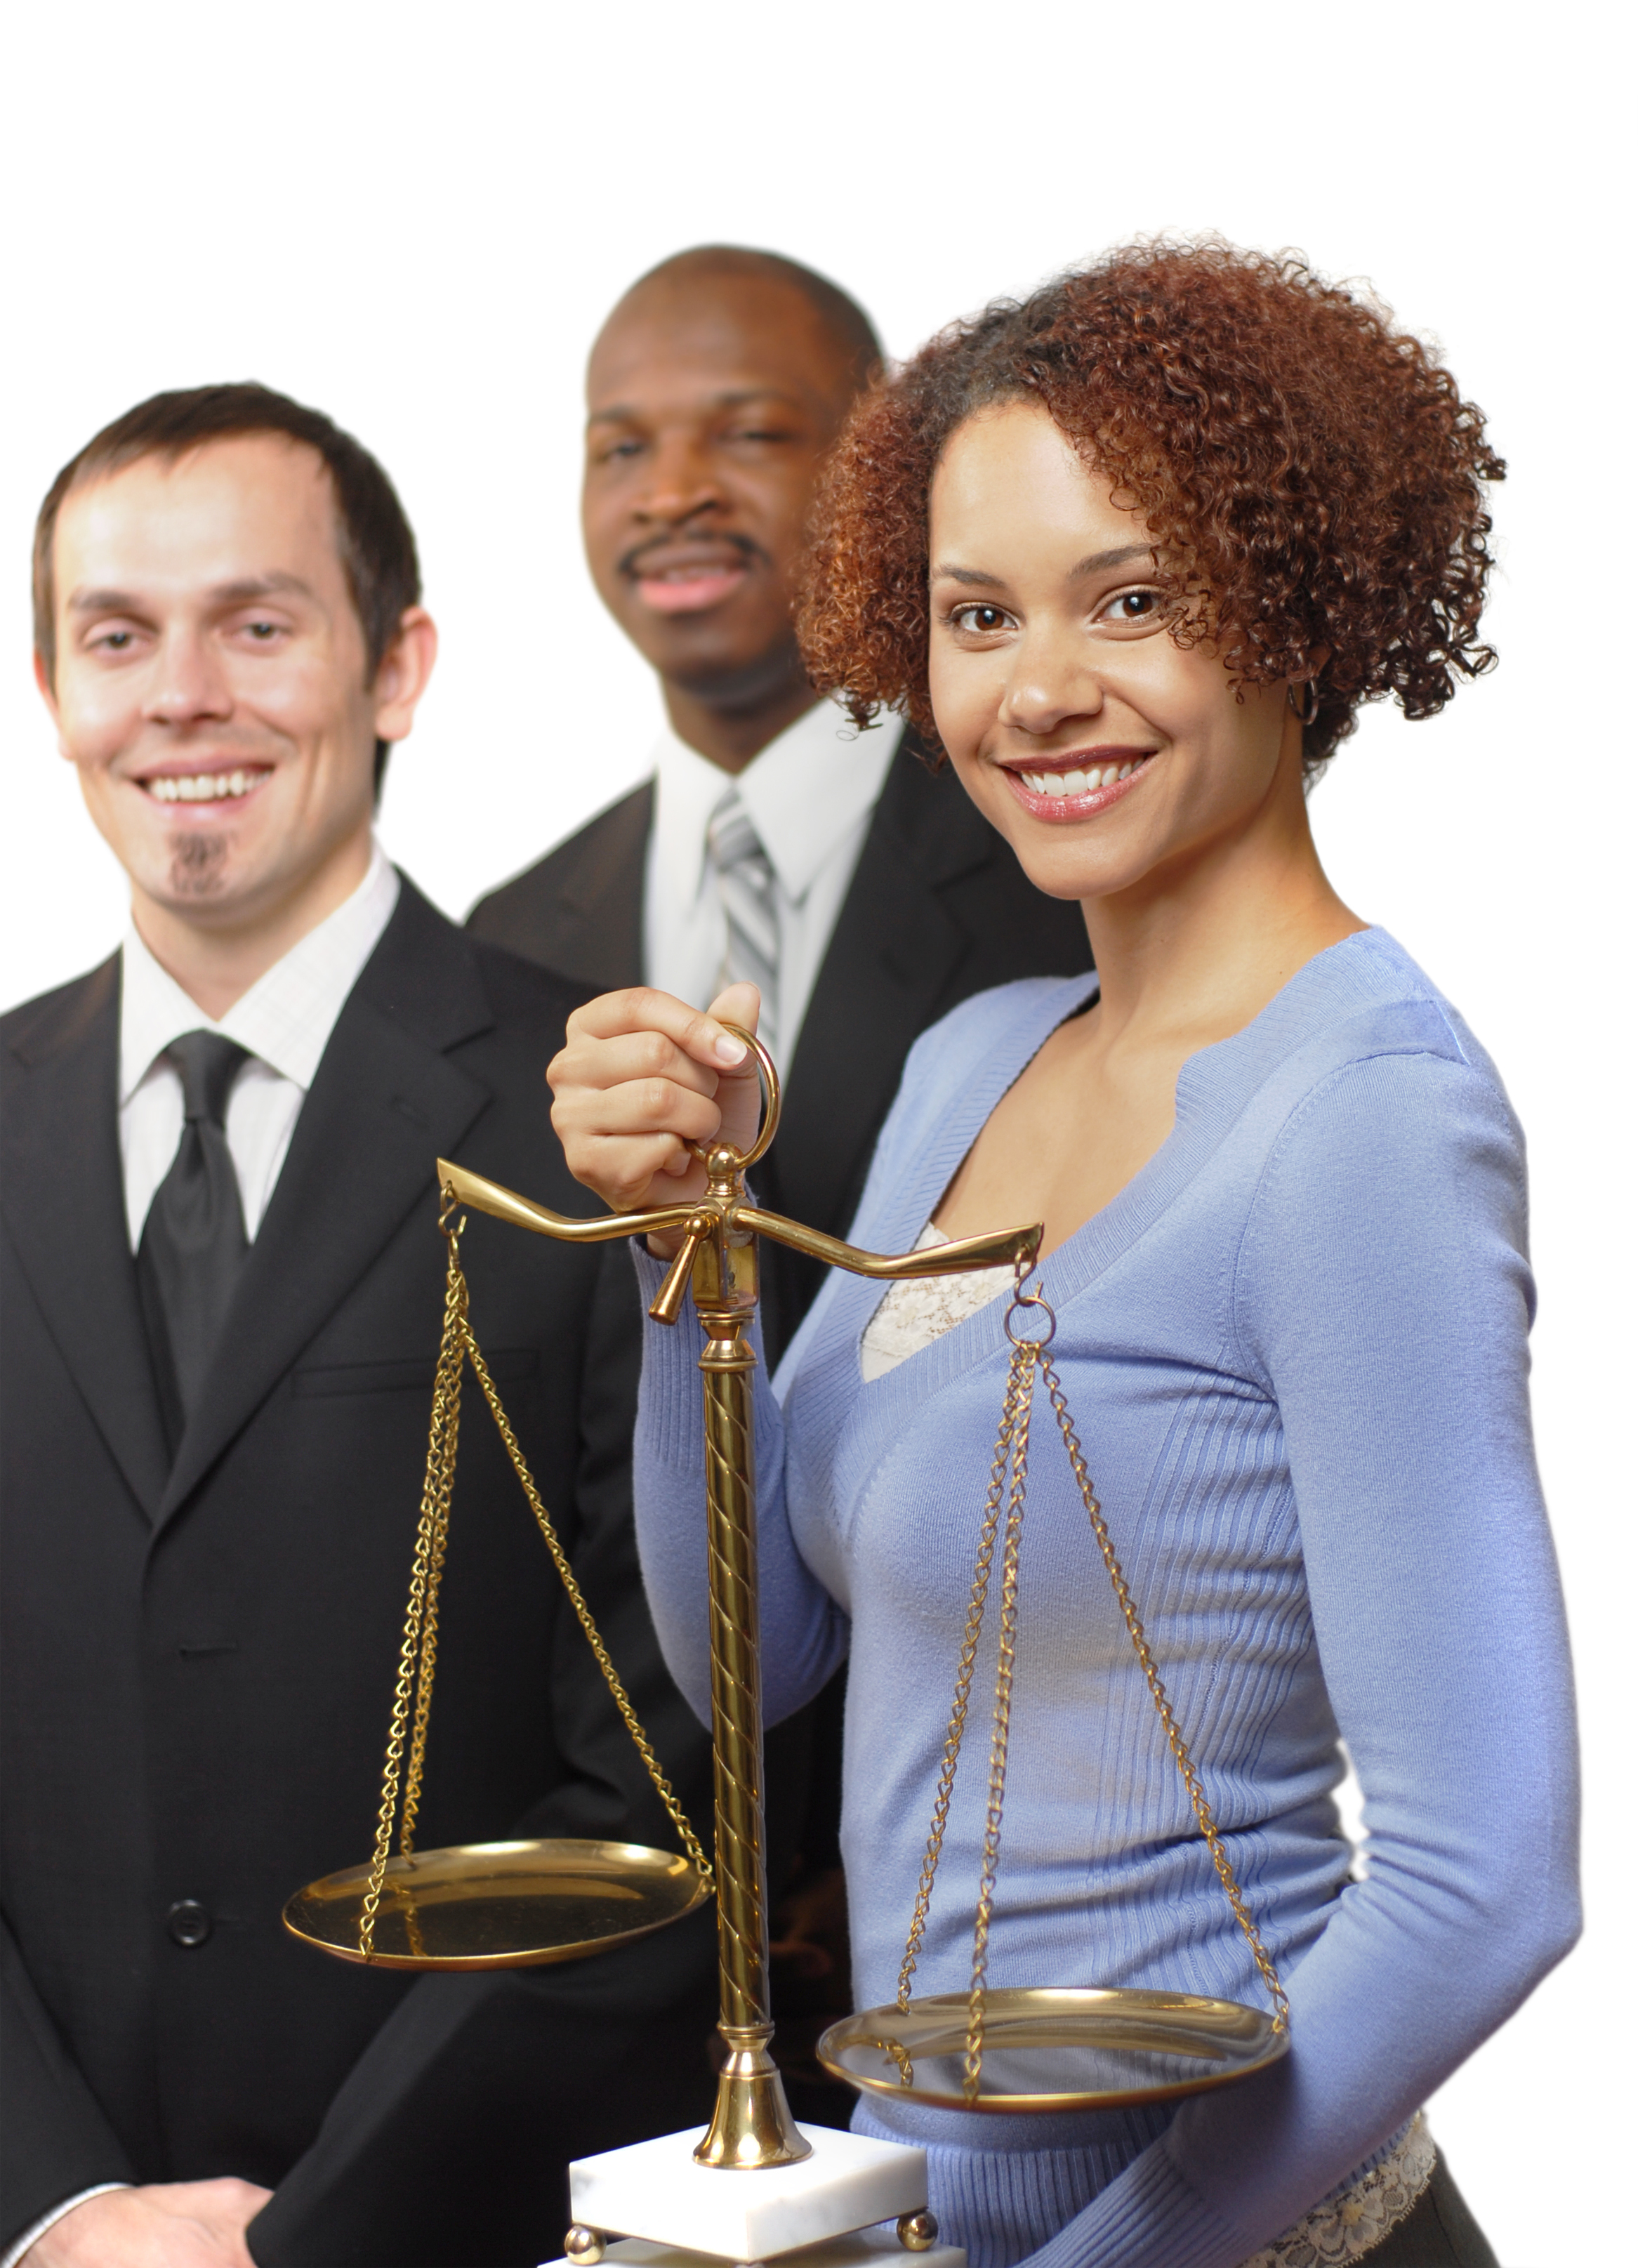 Become a paralegal